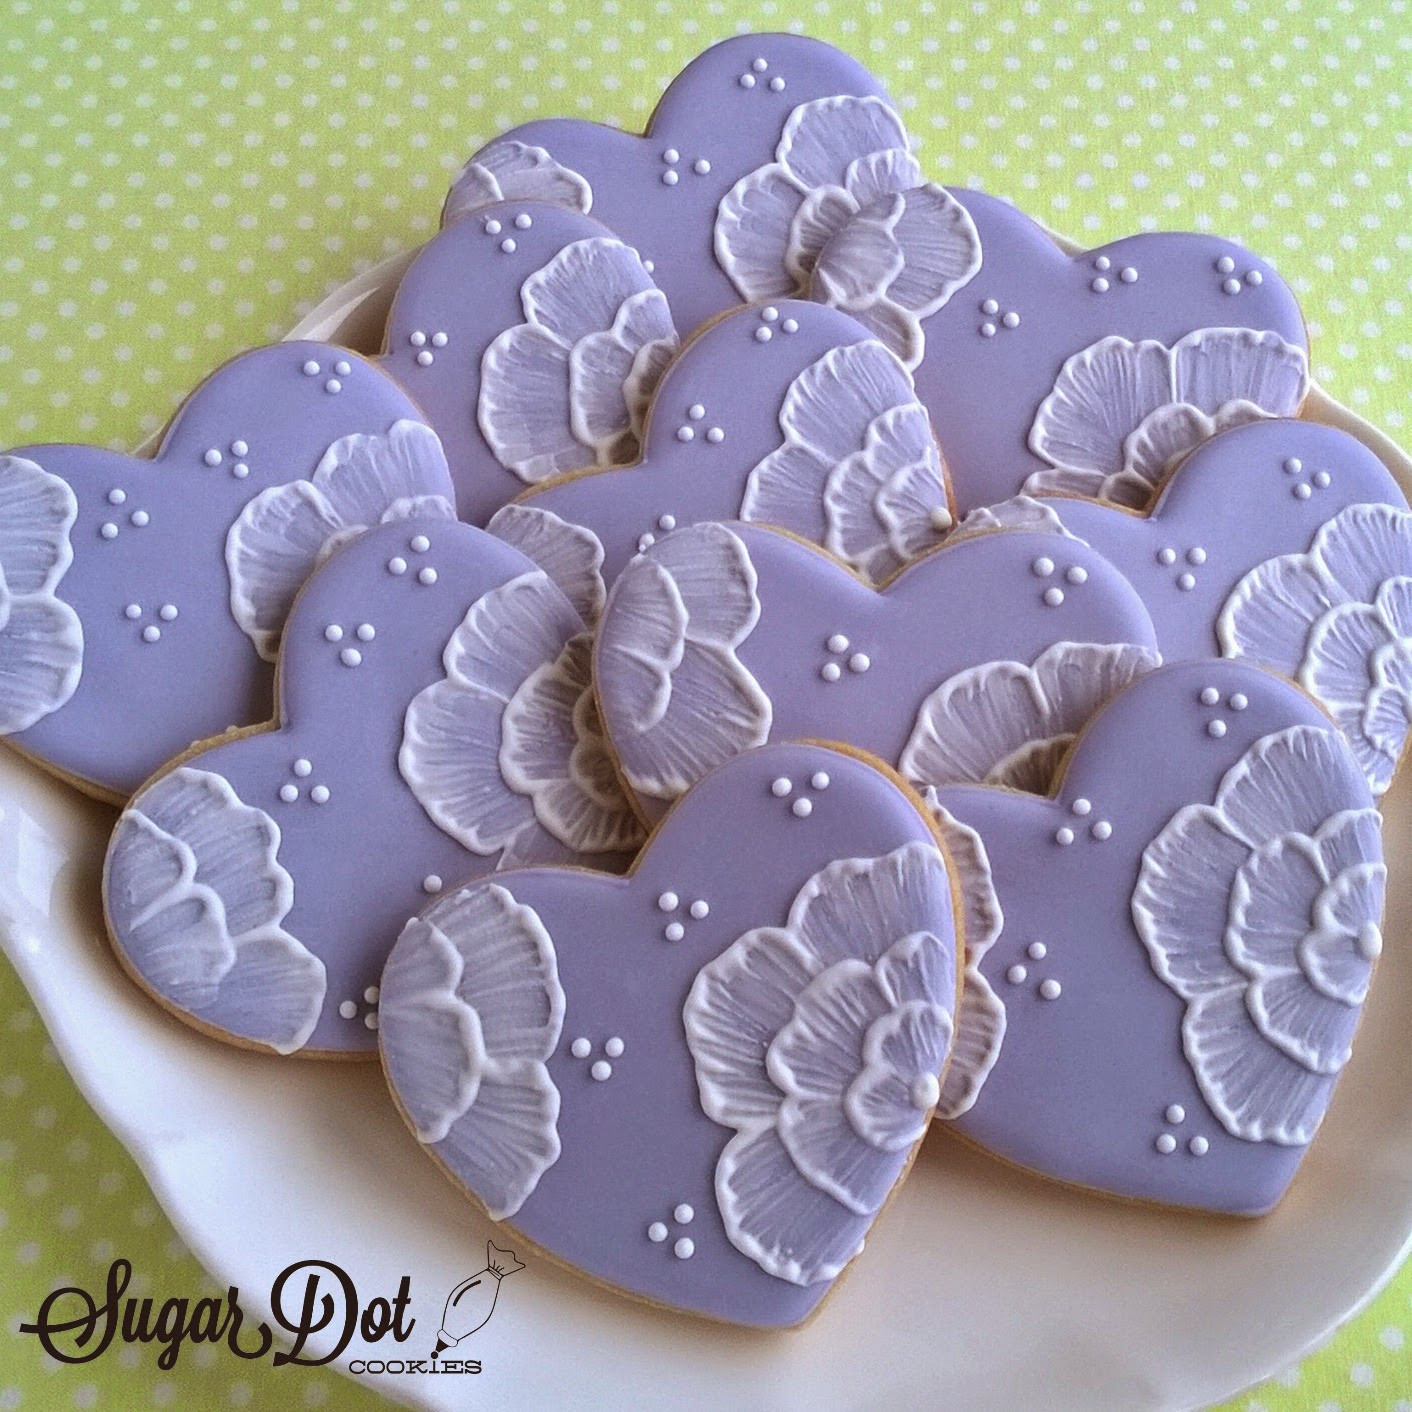 Royal Icing Sugar Cookies
 The flowers on these hearts were painted on with royal